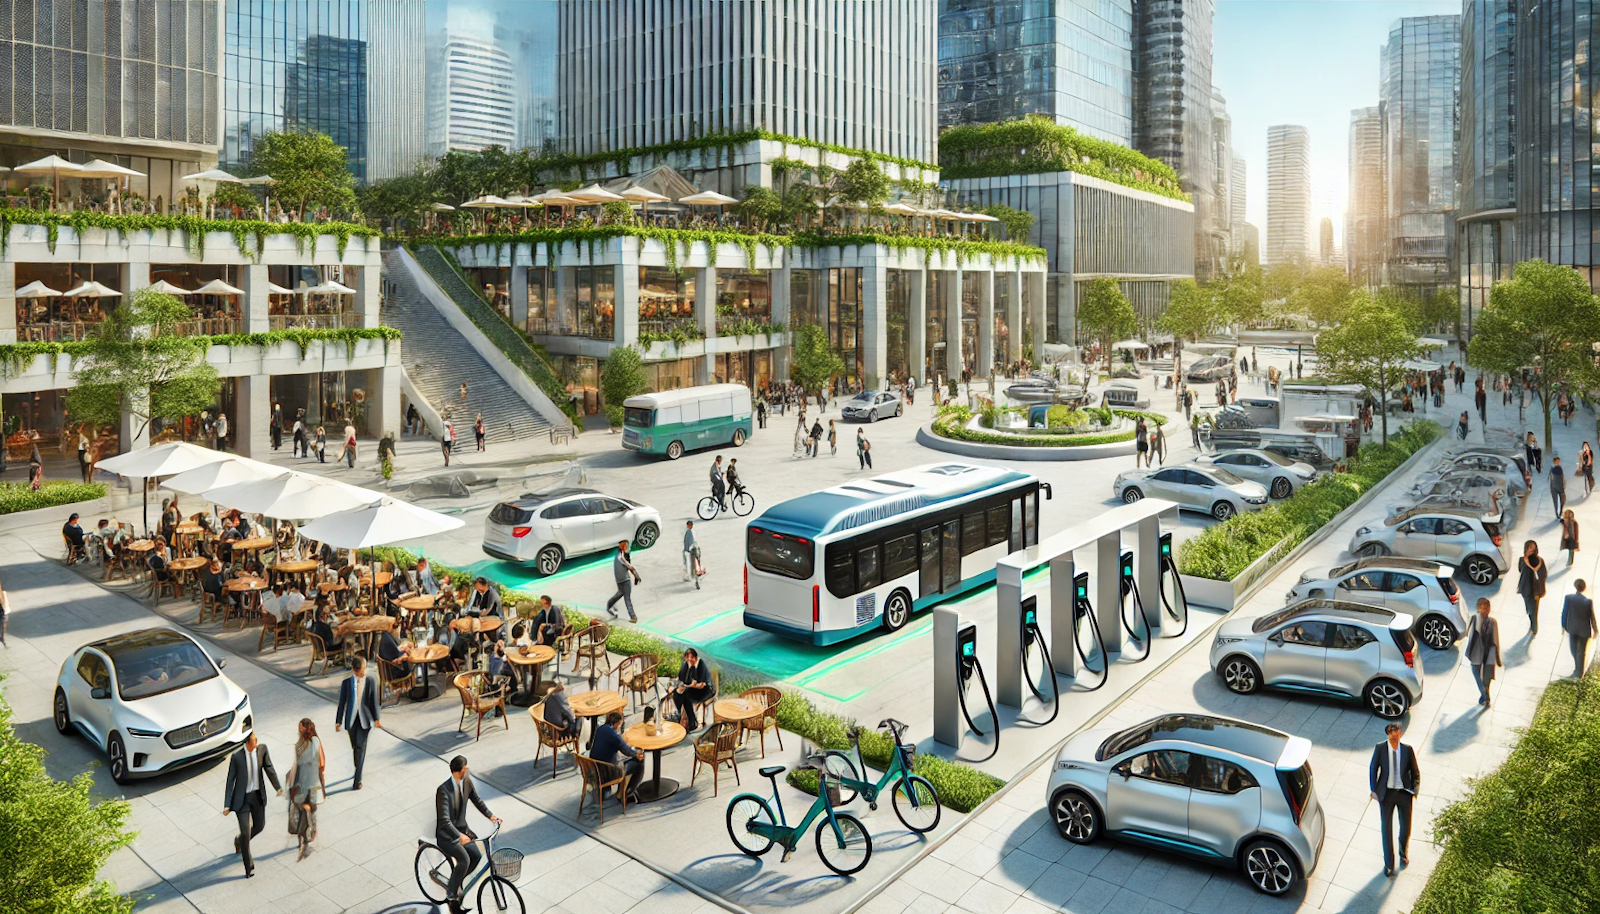 Urban plaza with an EV charging station, people, and cafes, surrounded by modern architecture and greenery, depicting sustainable city life.